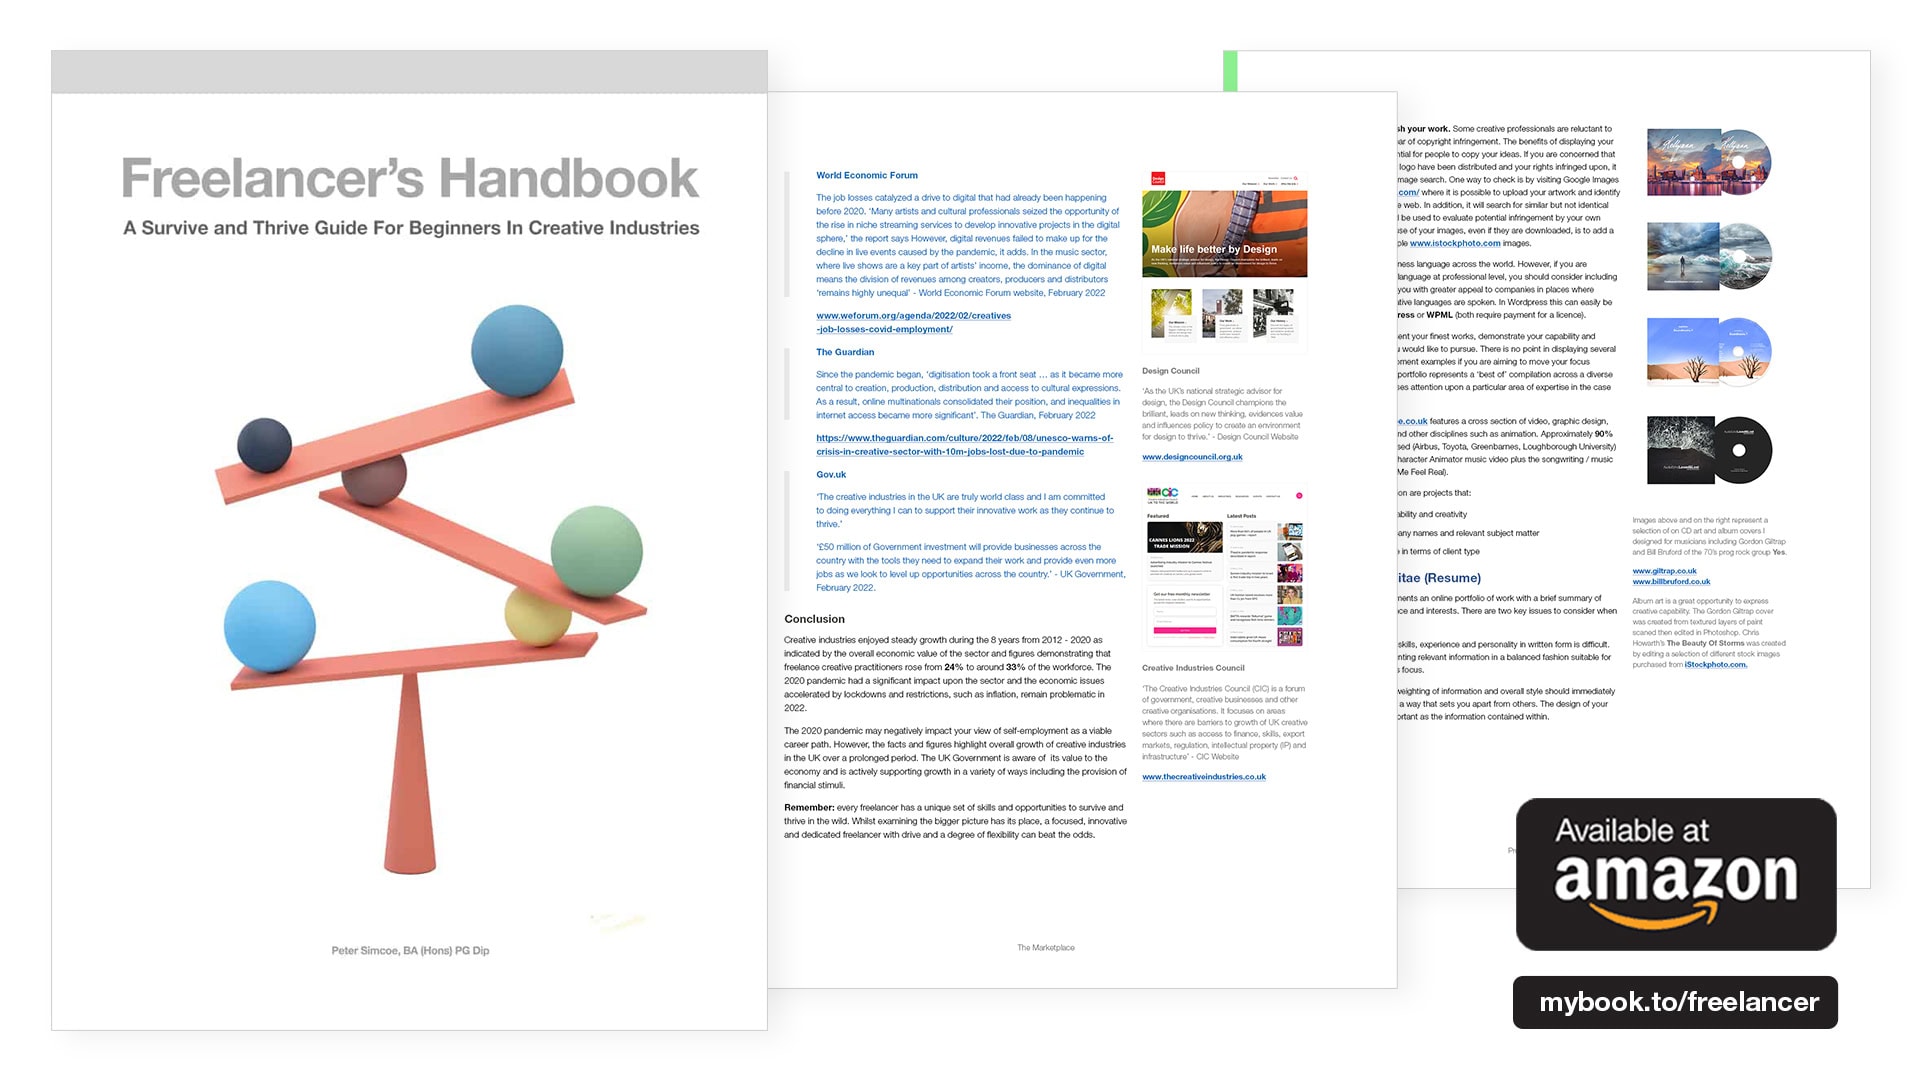 Freelancer's Handbook cover design and pages